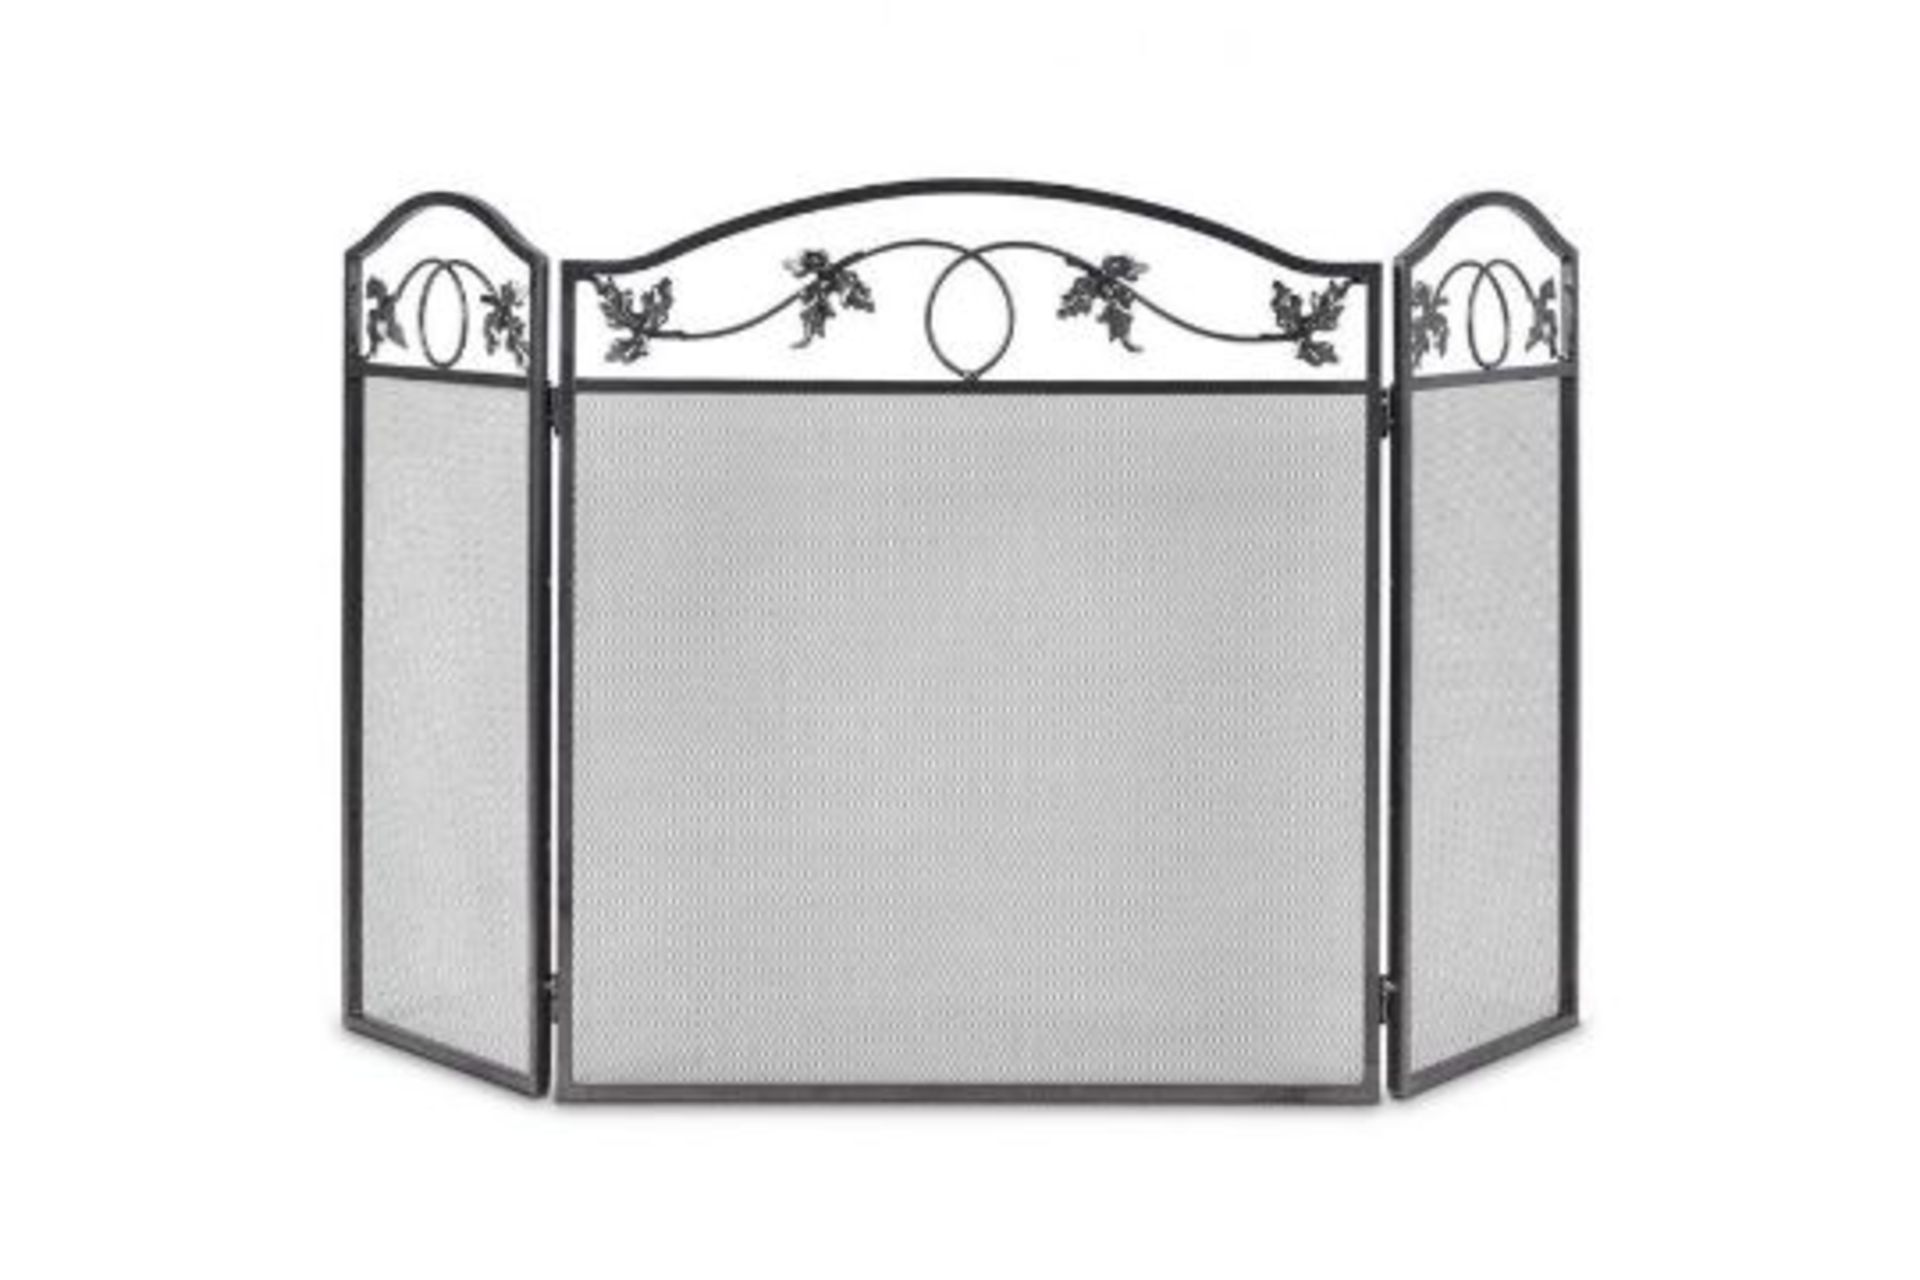 Freestanding Fireguard / Fire Screen. - R14.2. The fine mesh is completed by an elegant hollow